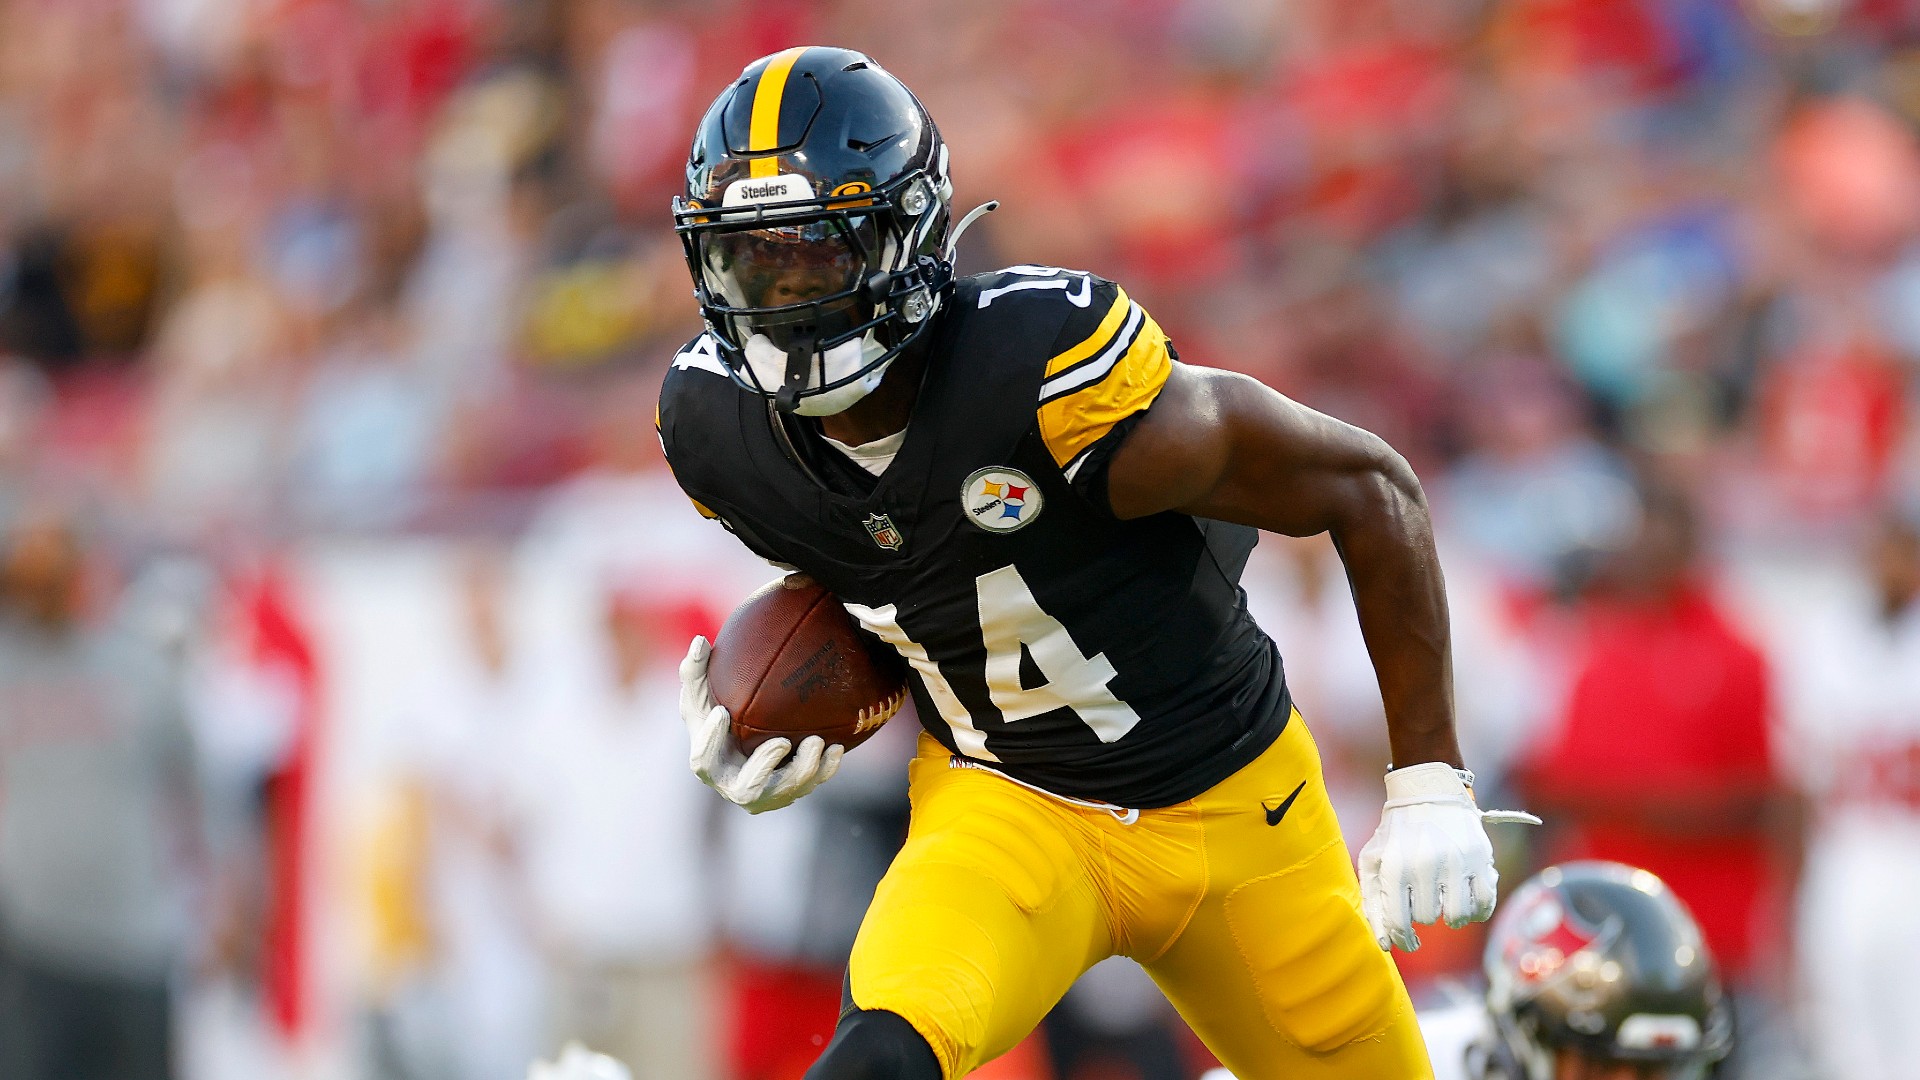 Steelers Stay Firm: Why Pittsburgh Won’t Trade Down Despite Draft Buzz